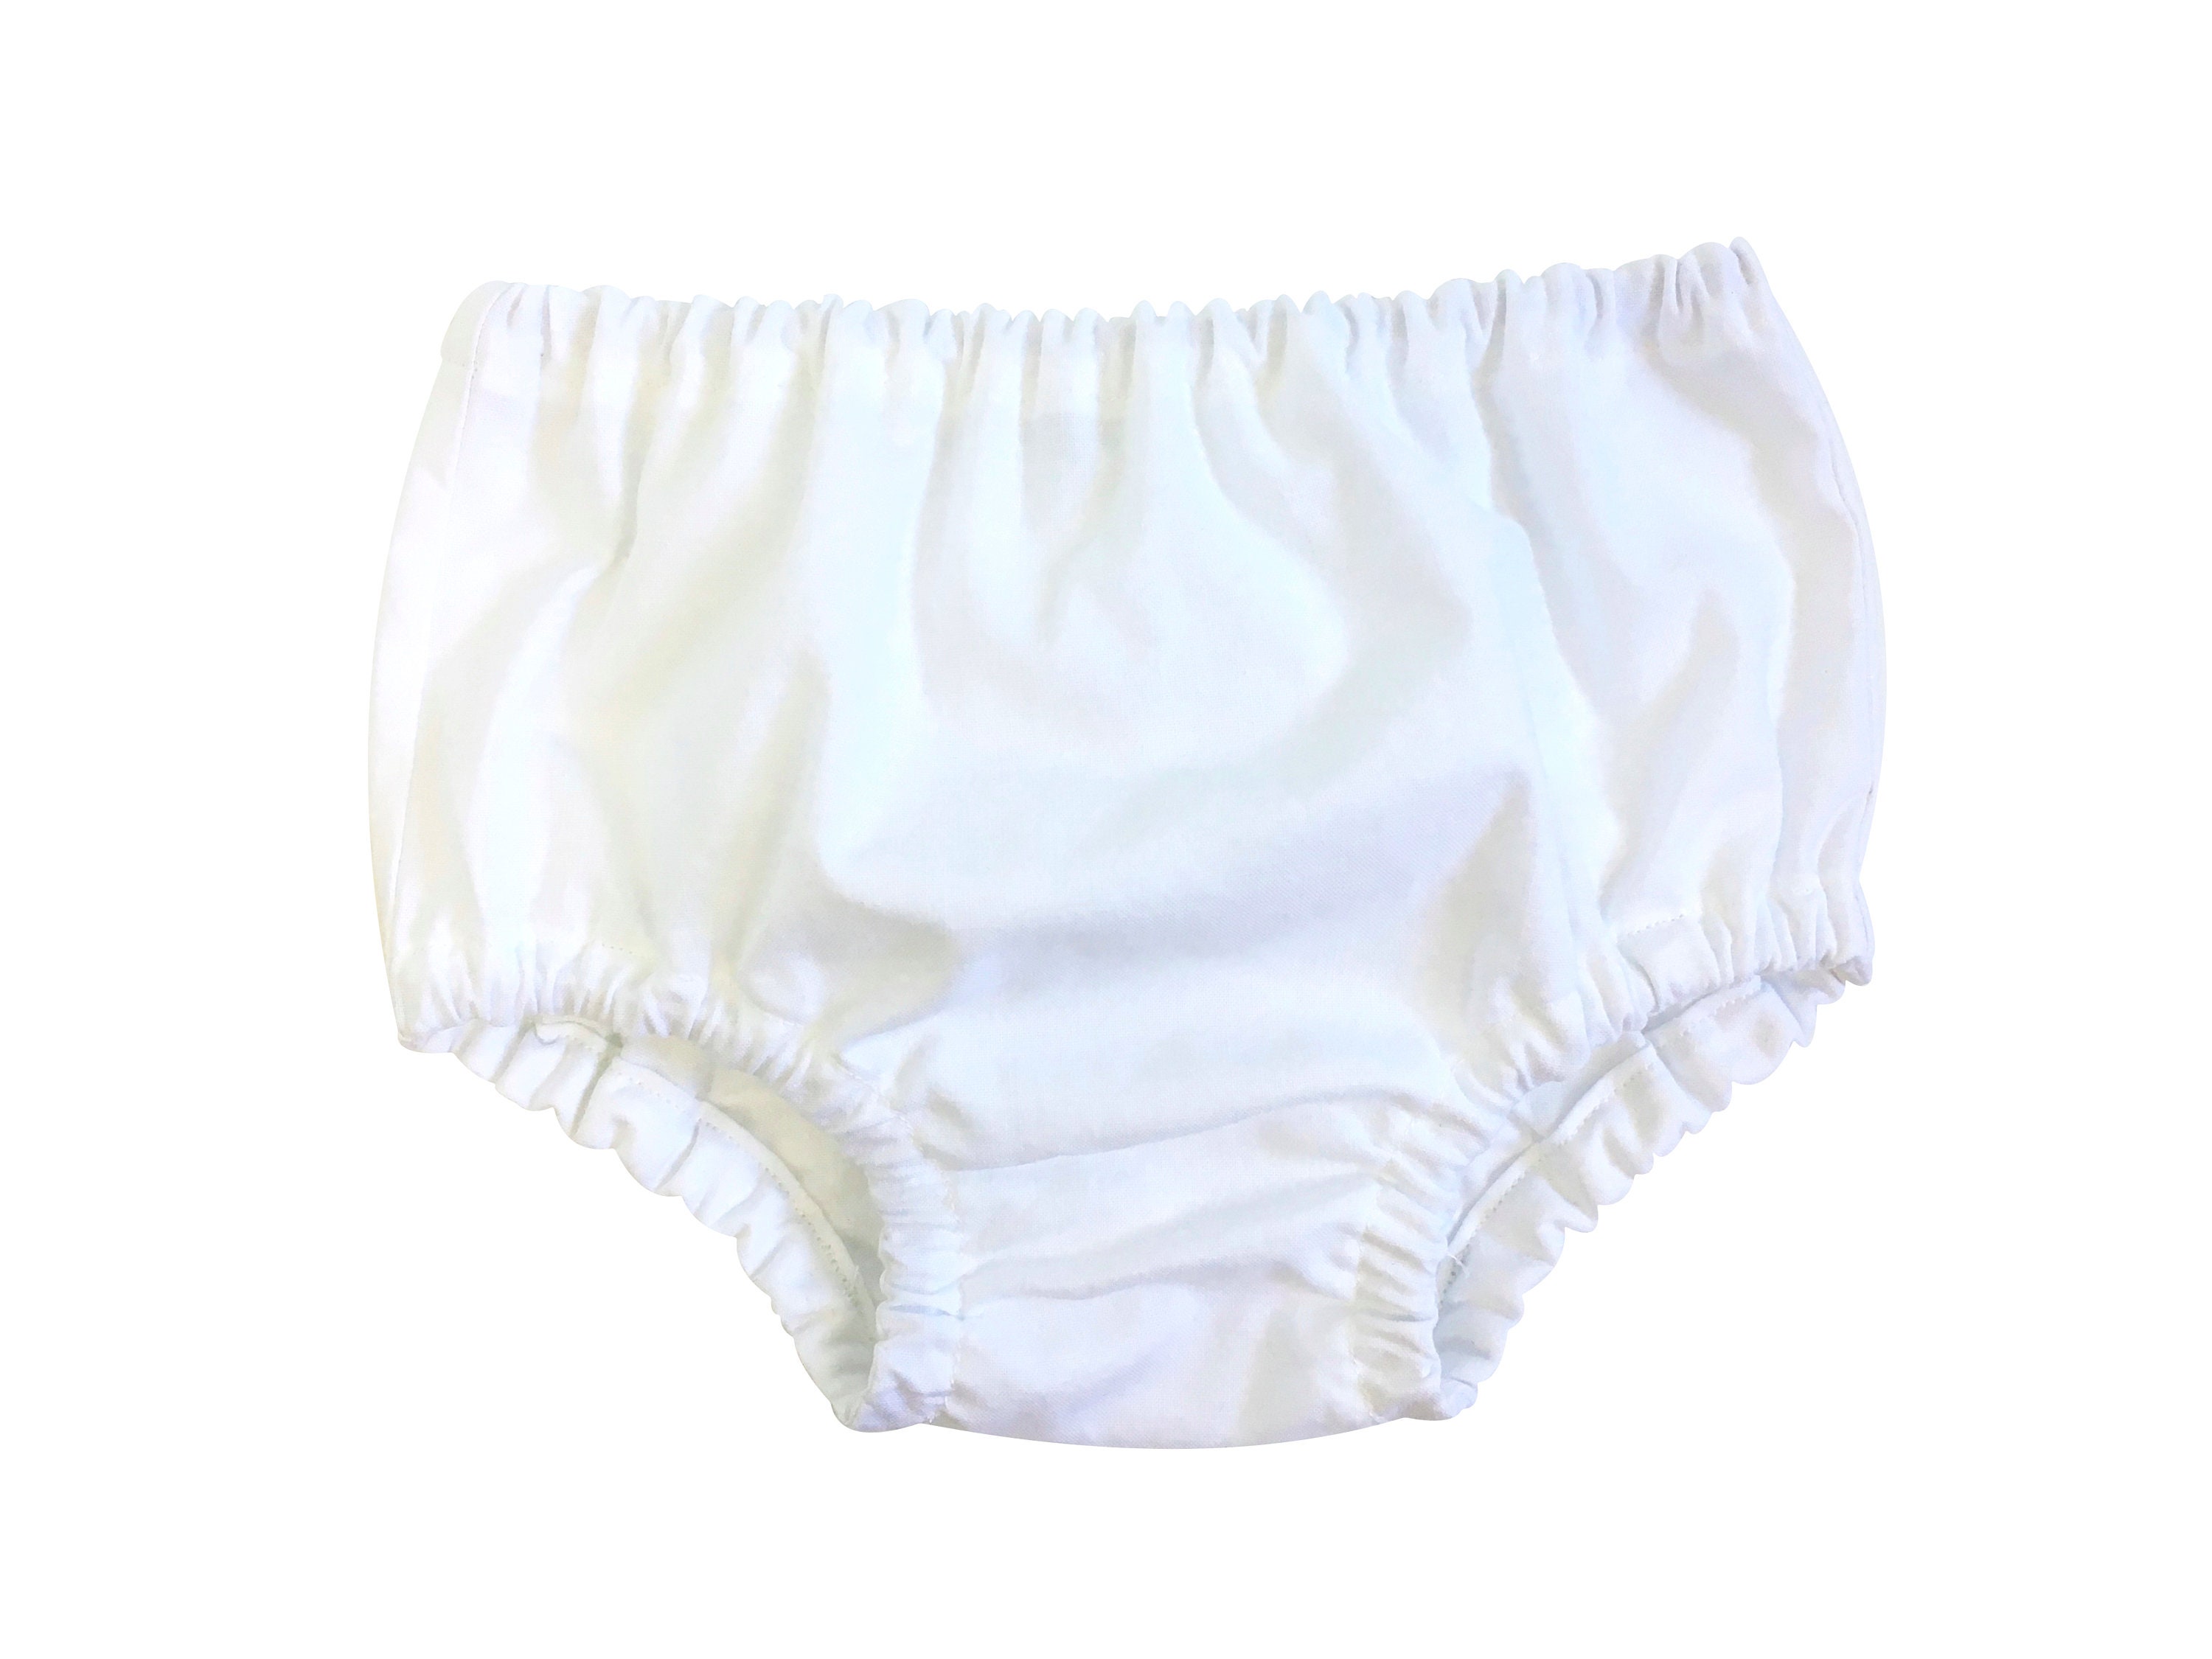 Unisex Baby White Diaper Cover Nappy Opens Flat 4 Preemie and Newborn Sizes 